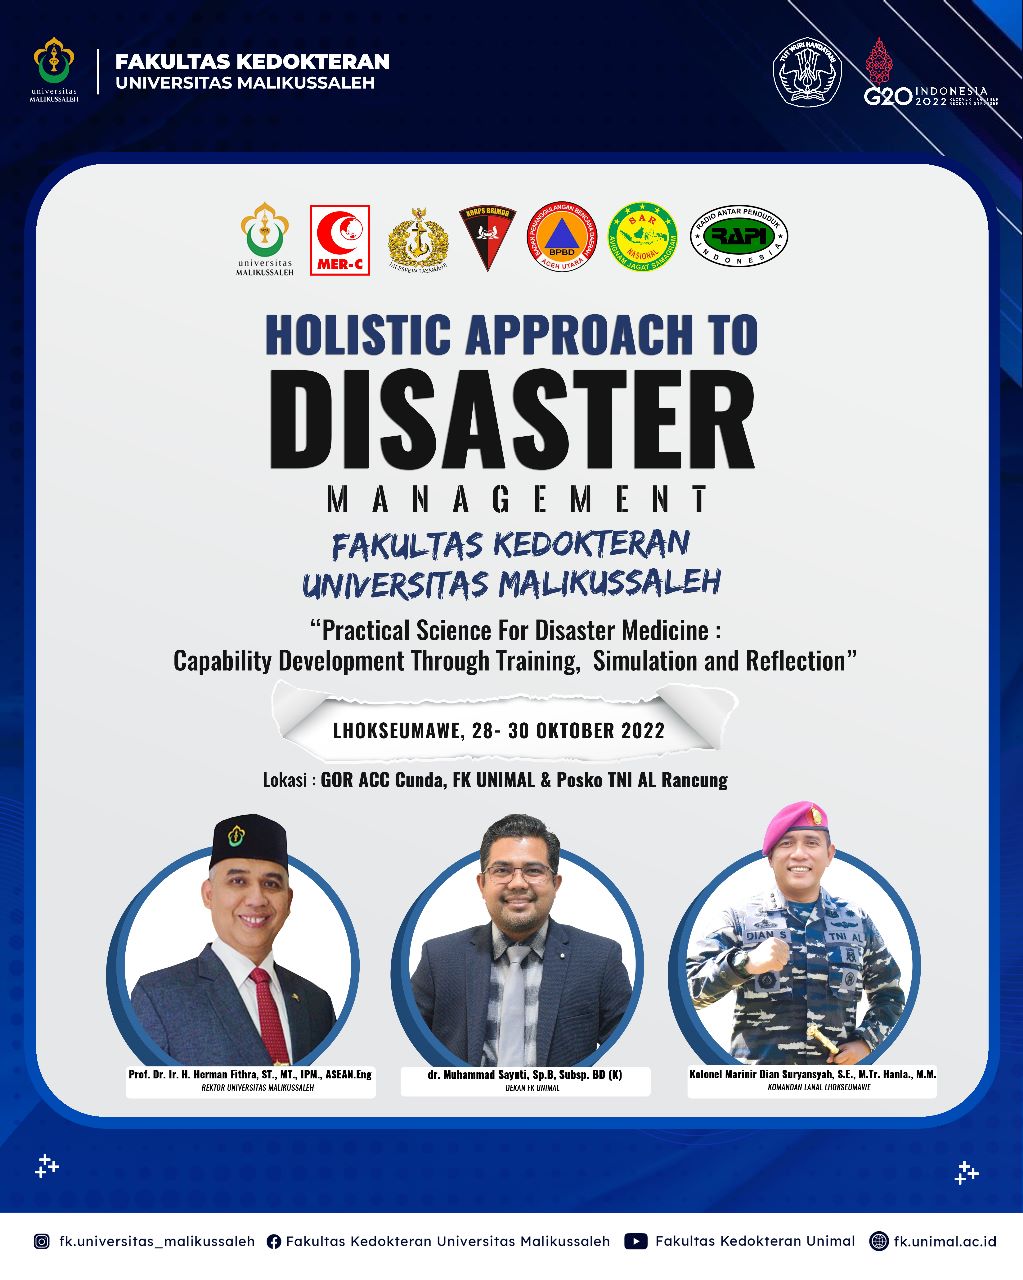 Holistic Approach to Disaster Management